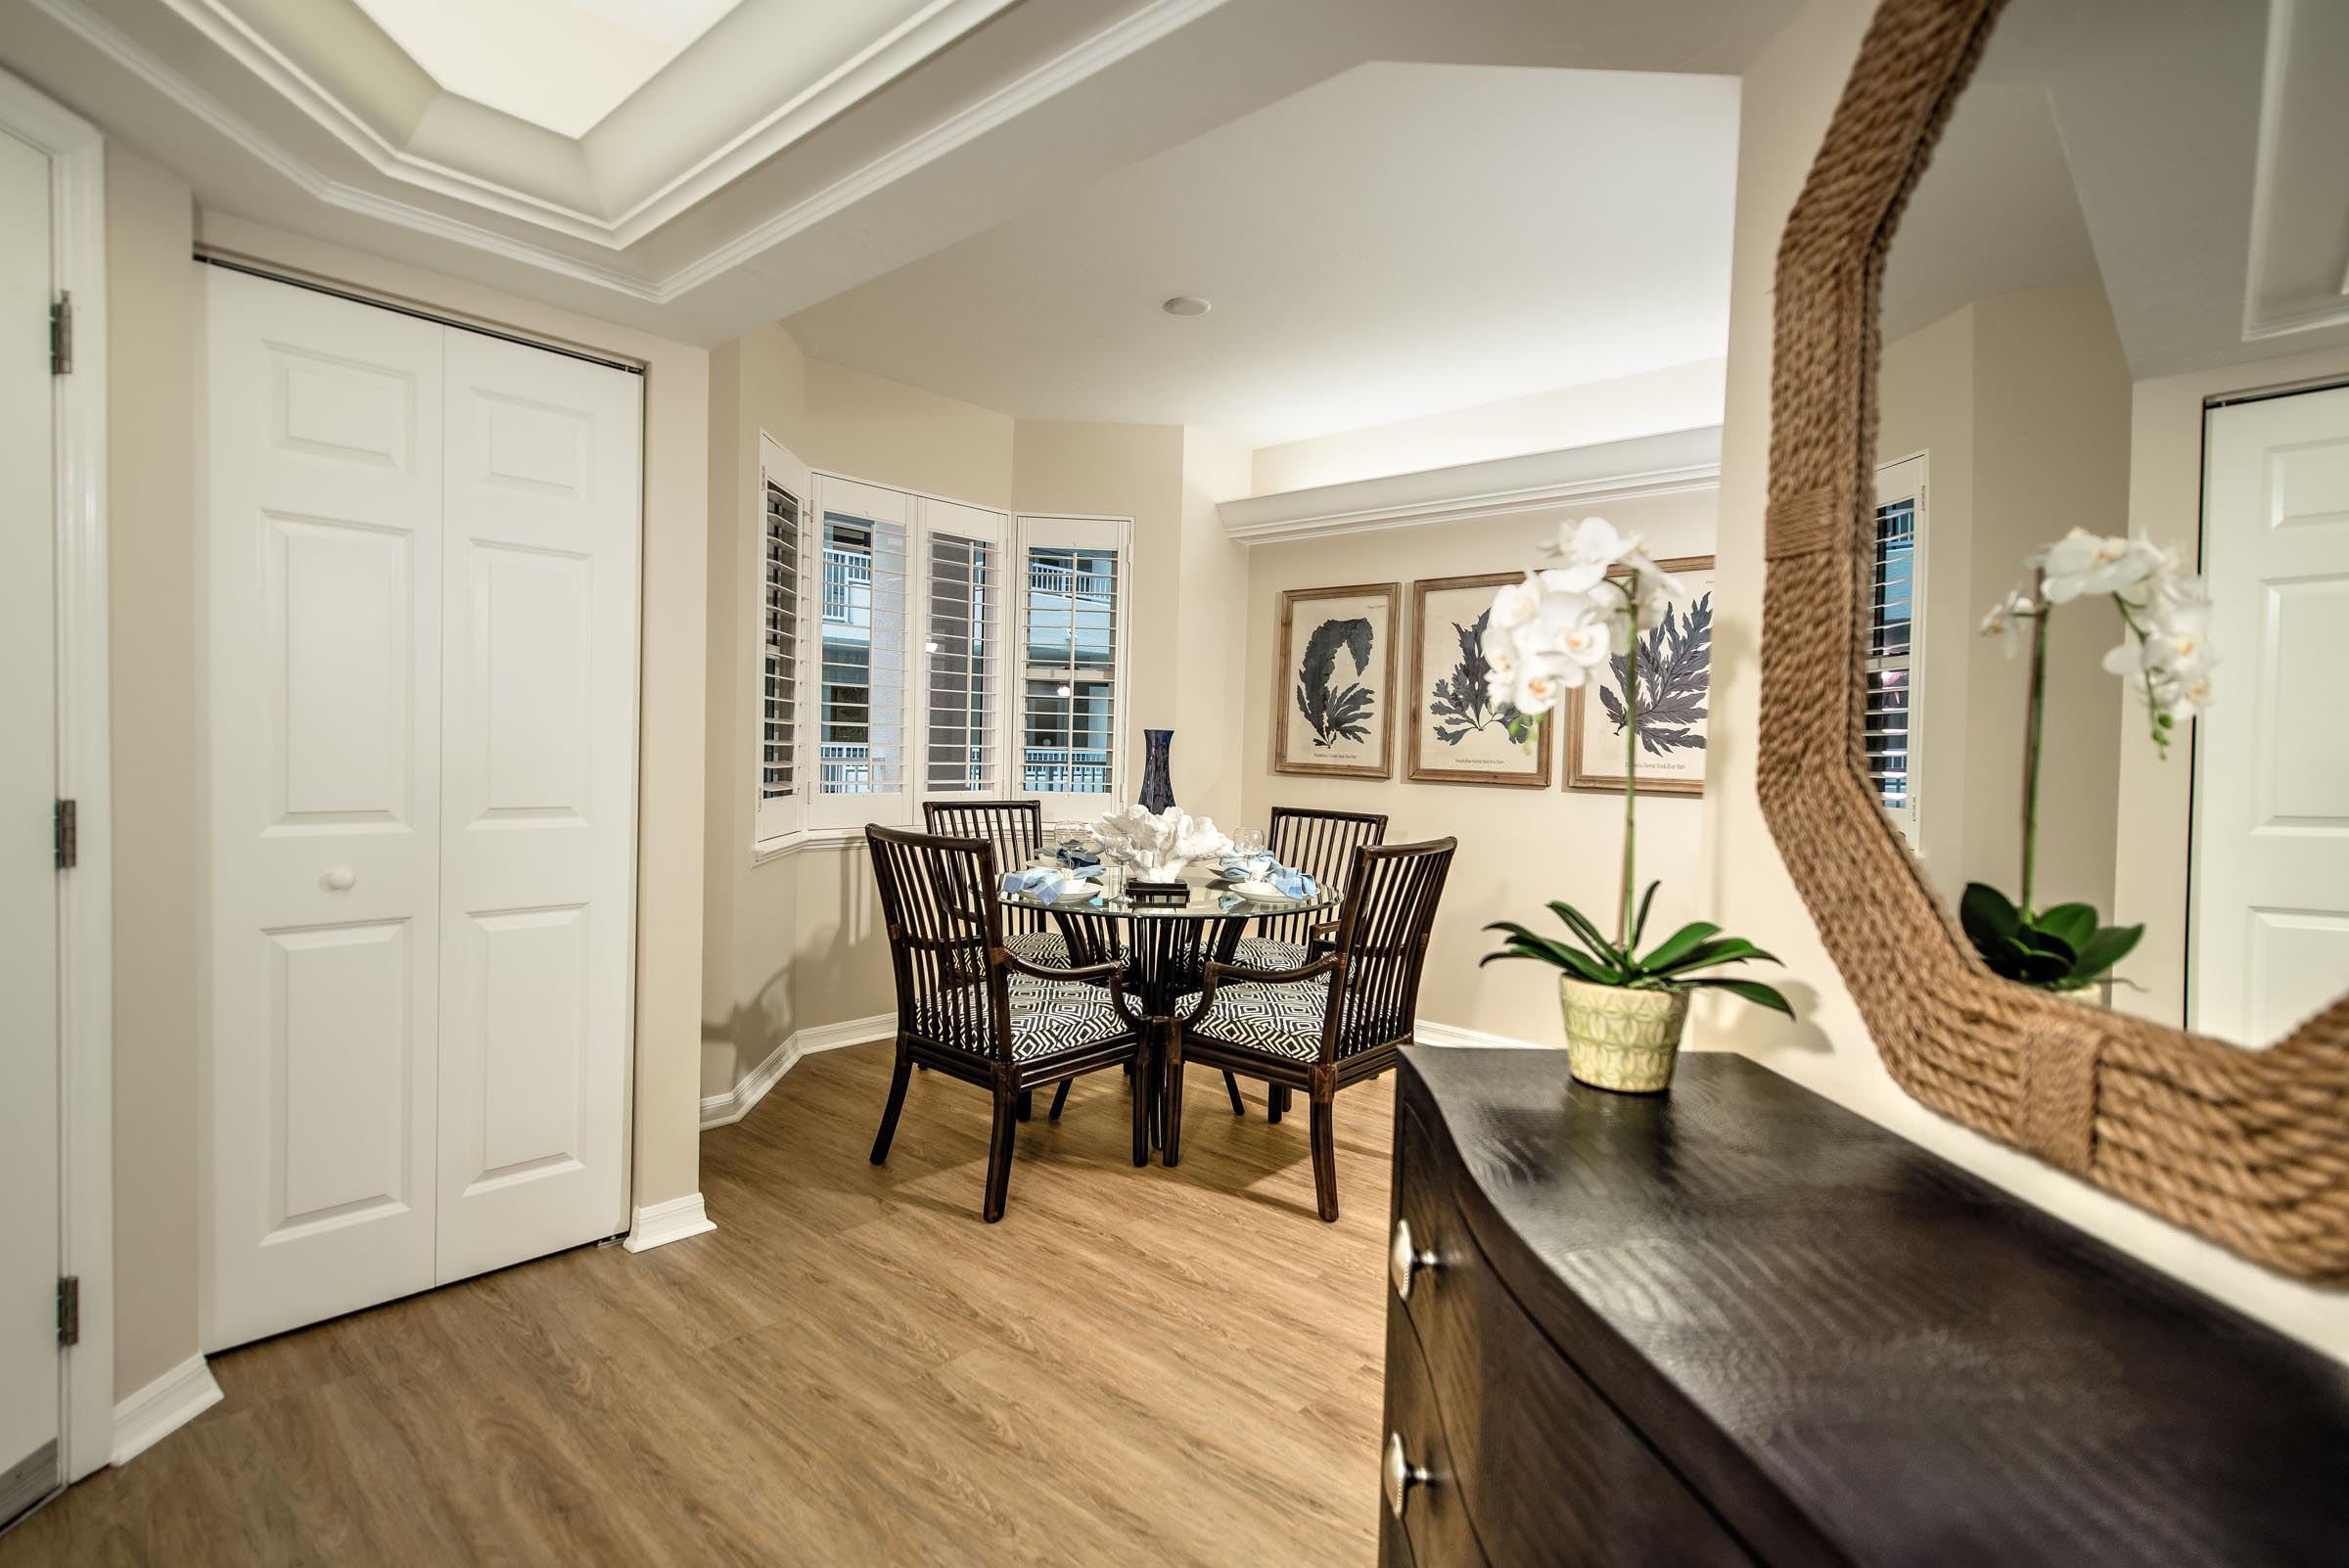 The breakfast nook at Lakewood Model Home at Shell Point Retirement Community